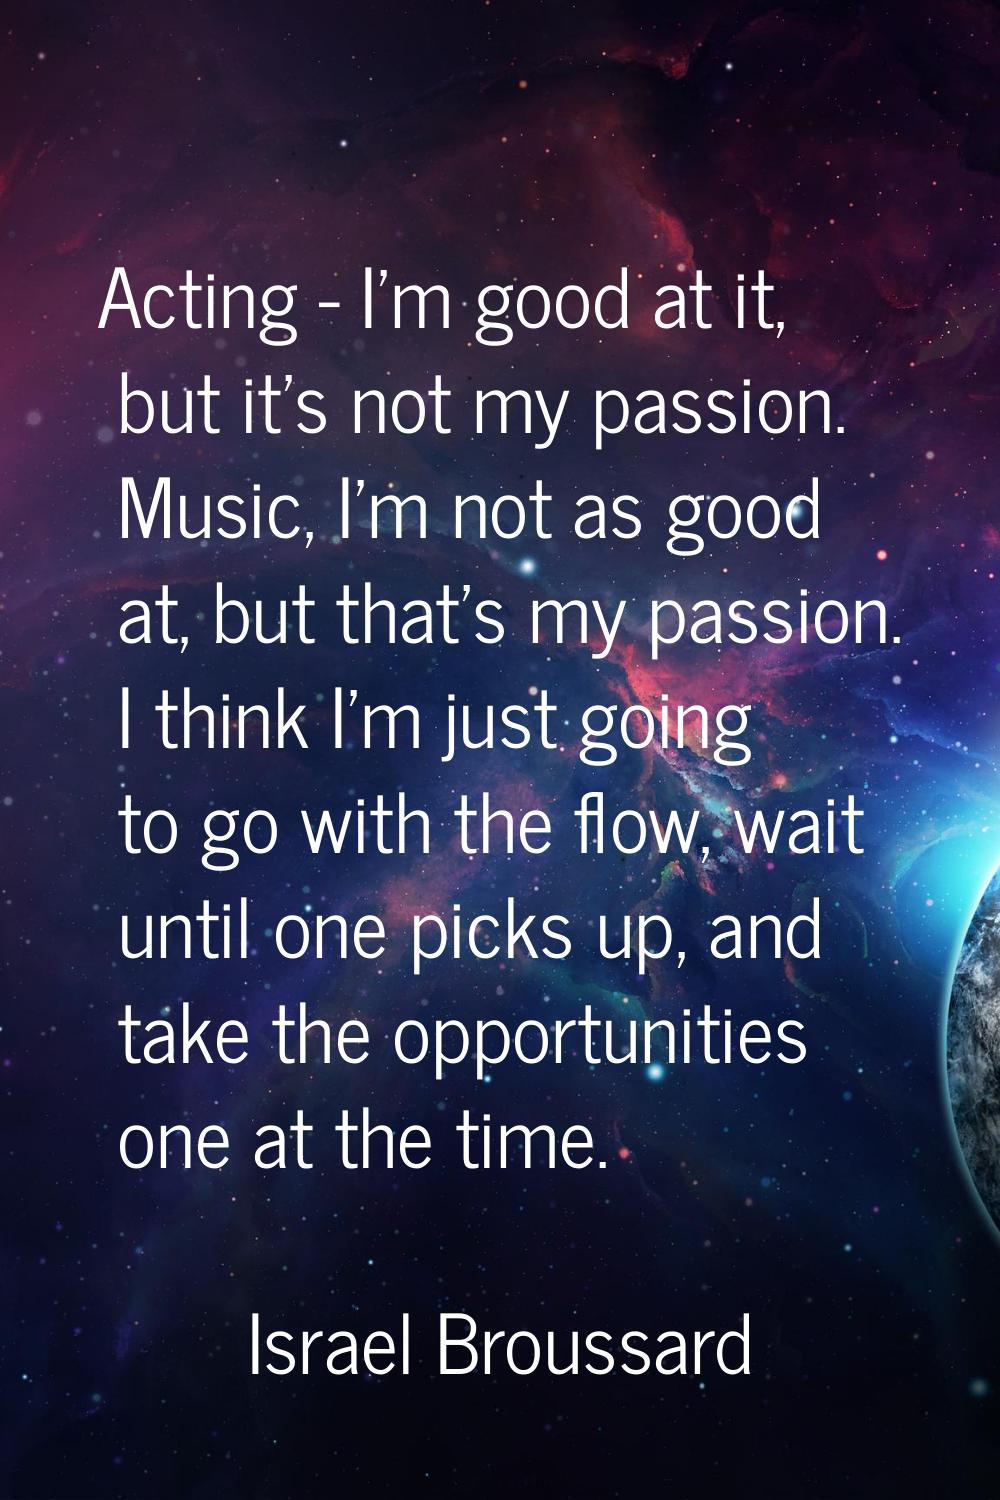 Acting - I'm good at it, but it's not my passion. Music, I'm not as good at, but that's my passion.